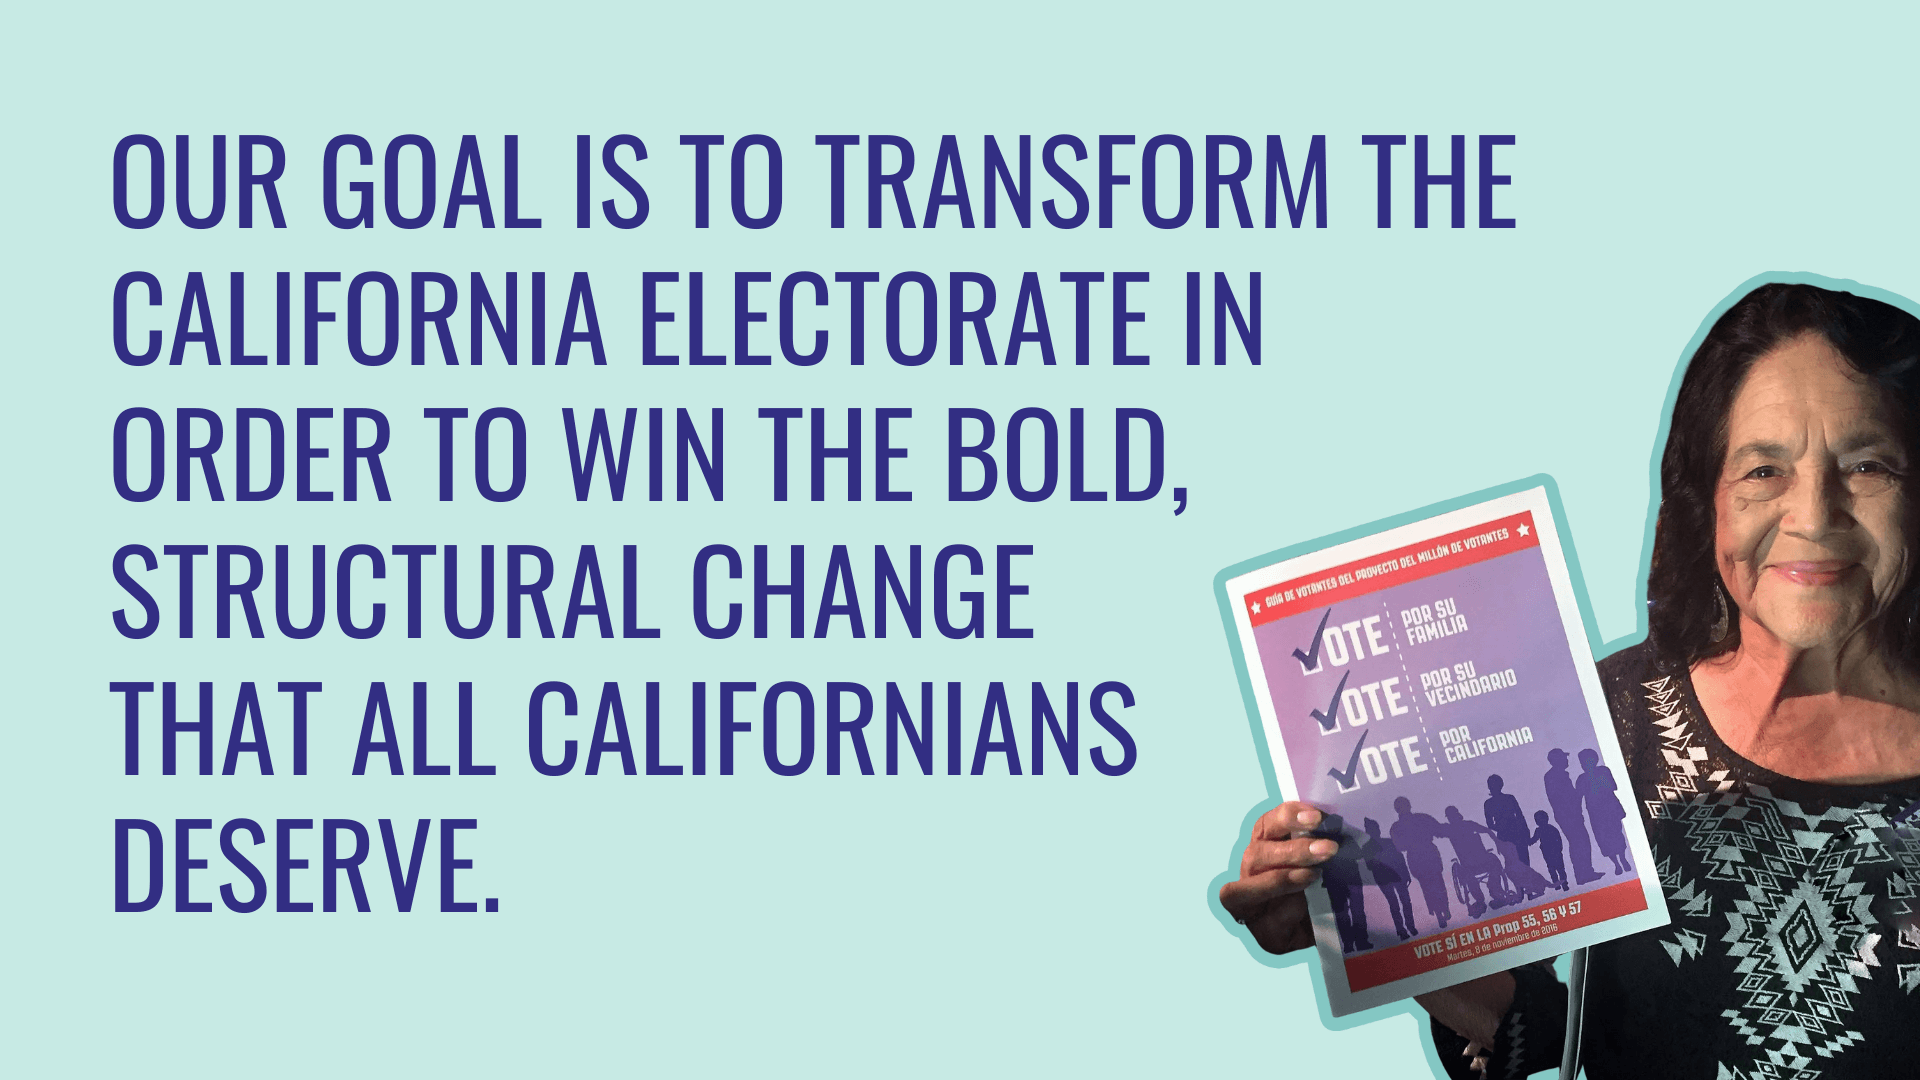  Dolores Huertes outlined in green next to text, “Our goal is to transform the California electorate in order to win the bold, structural change that all Californians deserve.”  